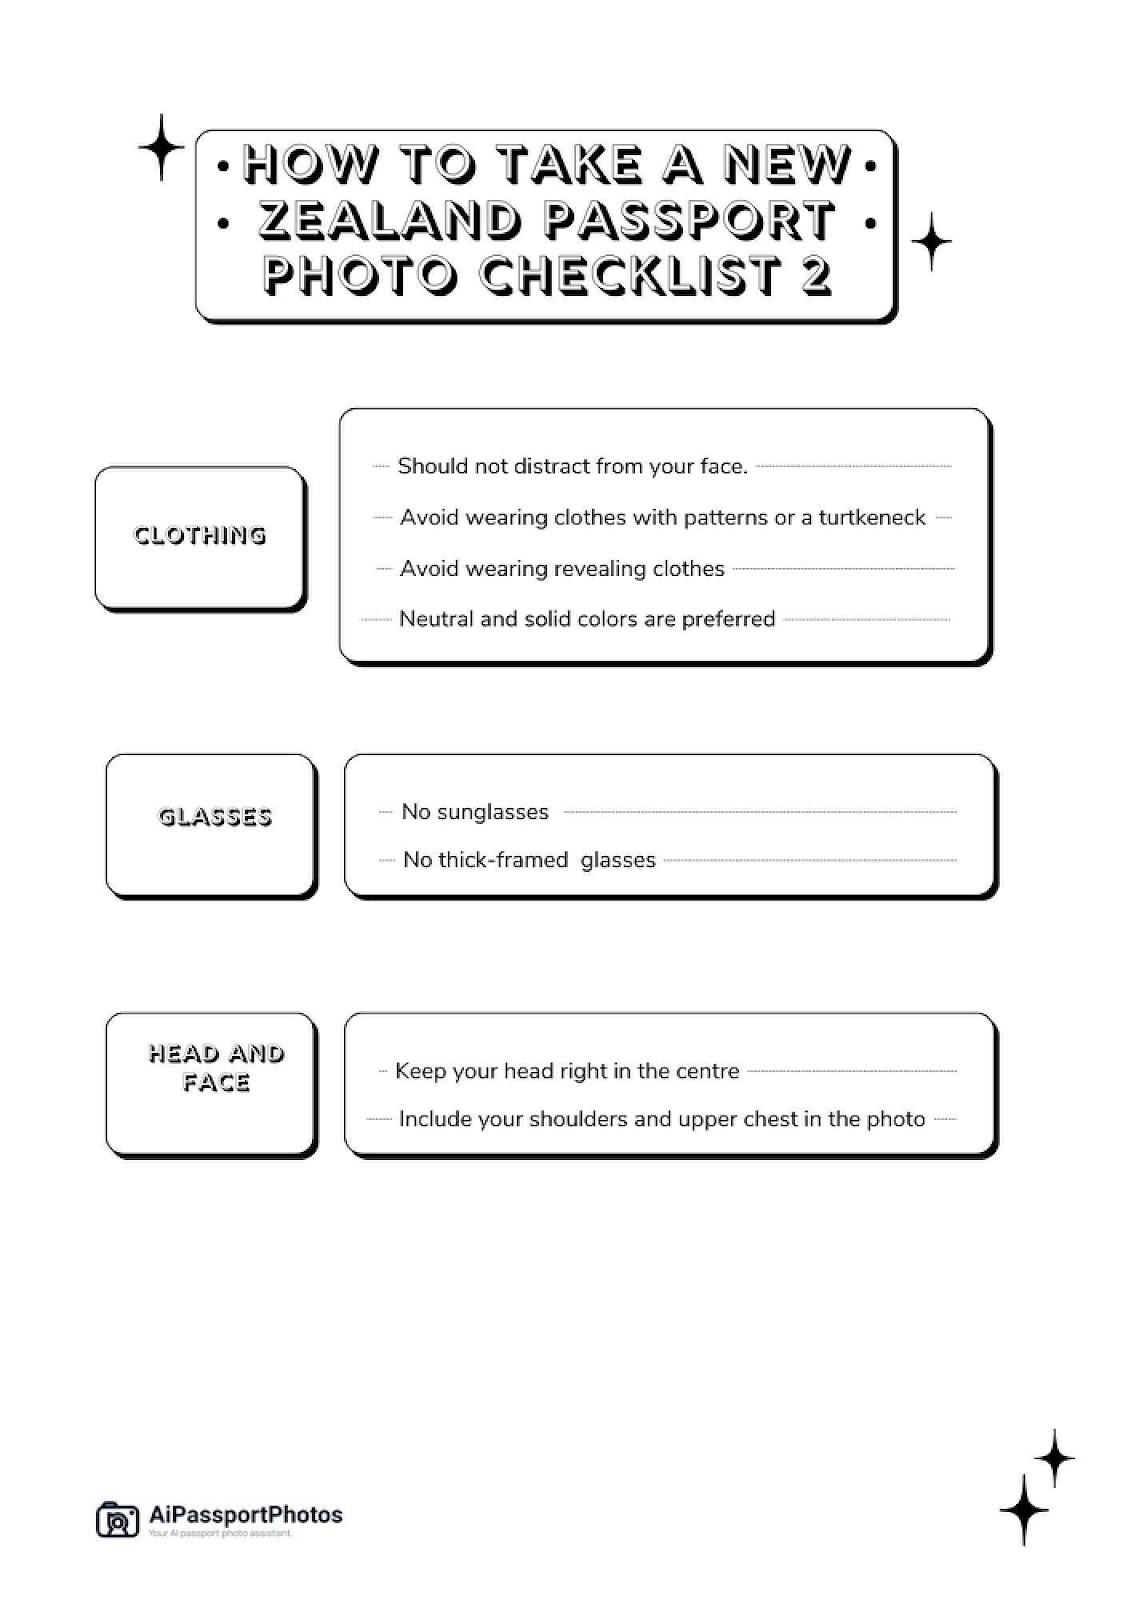 How to Take a New Zealand Passport Photo Checklist 2